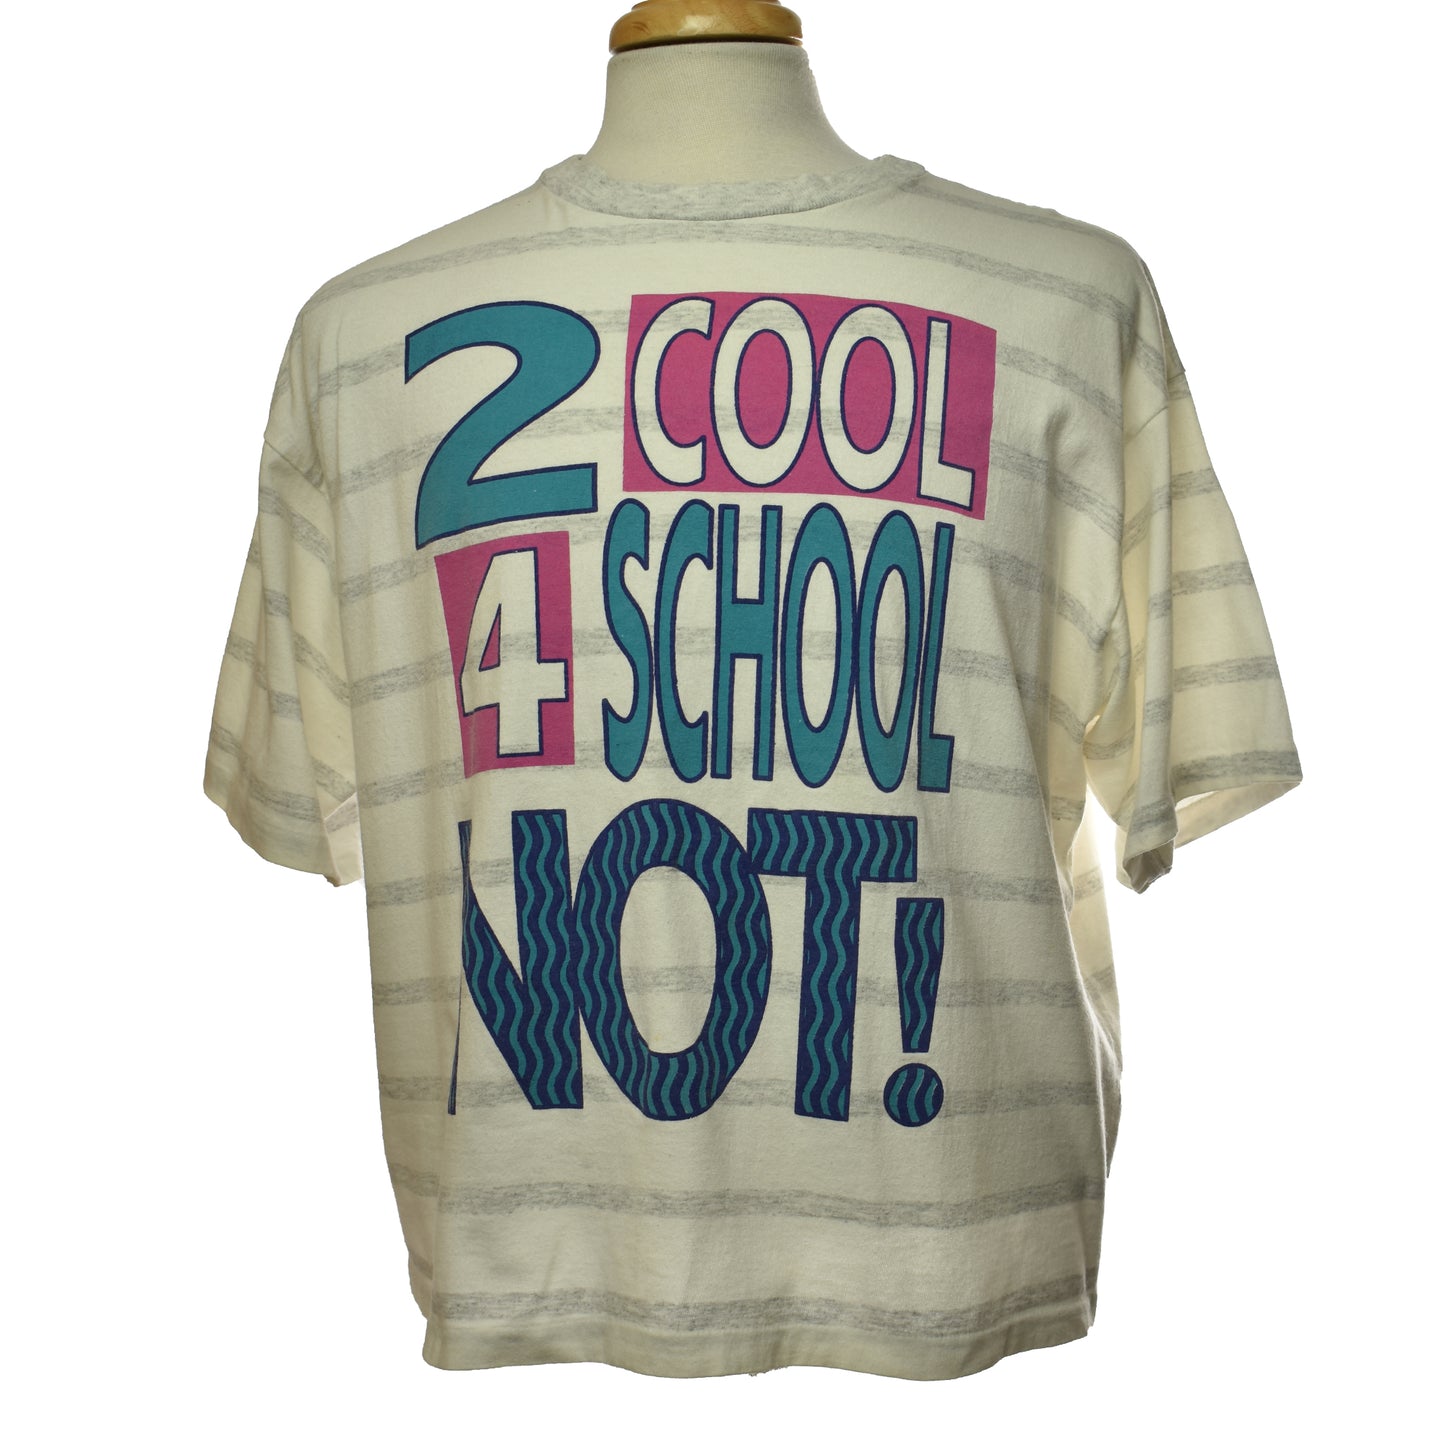 Vintage 80s 90s Ross International 2 Cool 4 School, NOT! T-shirt - Single Stitch - Made In USA